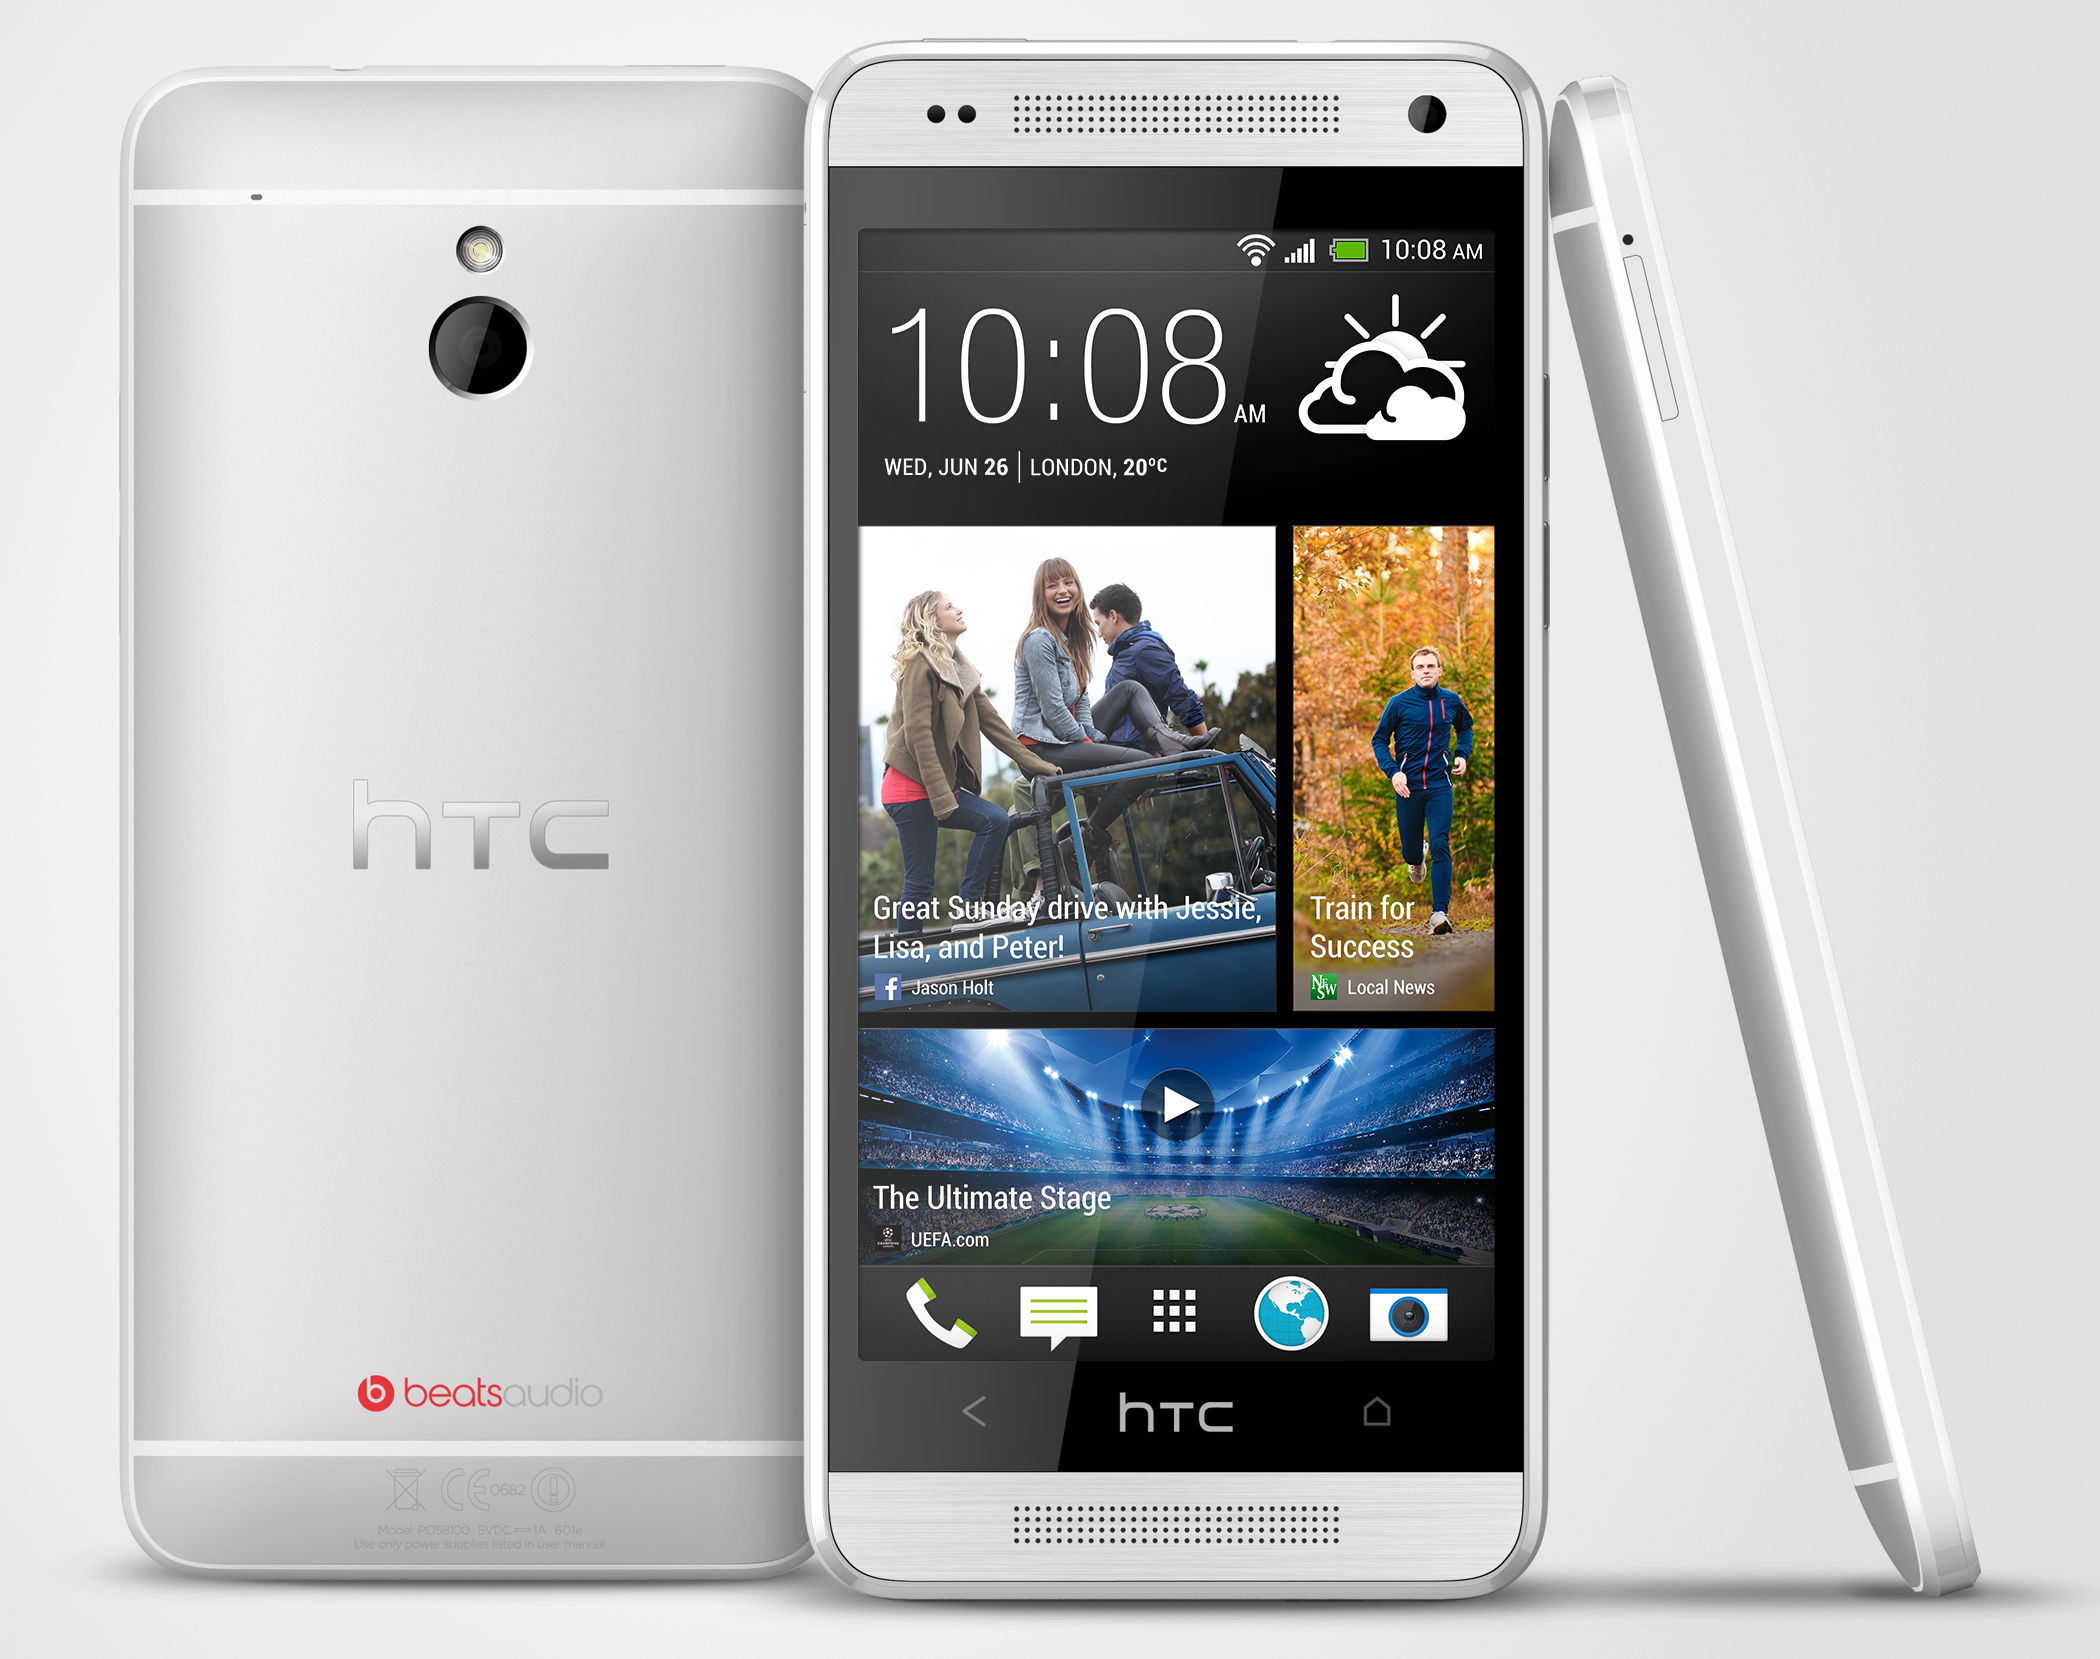 HTC Announces One mini - display, aluminum, and Snapdragon 400